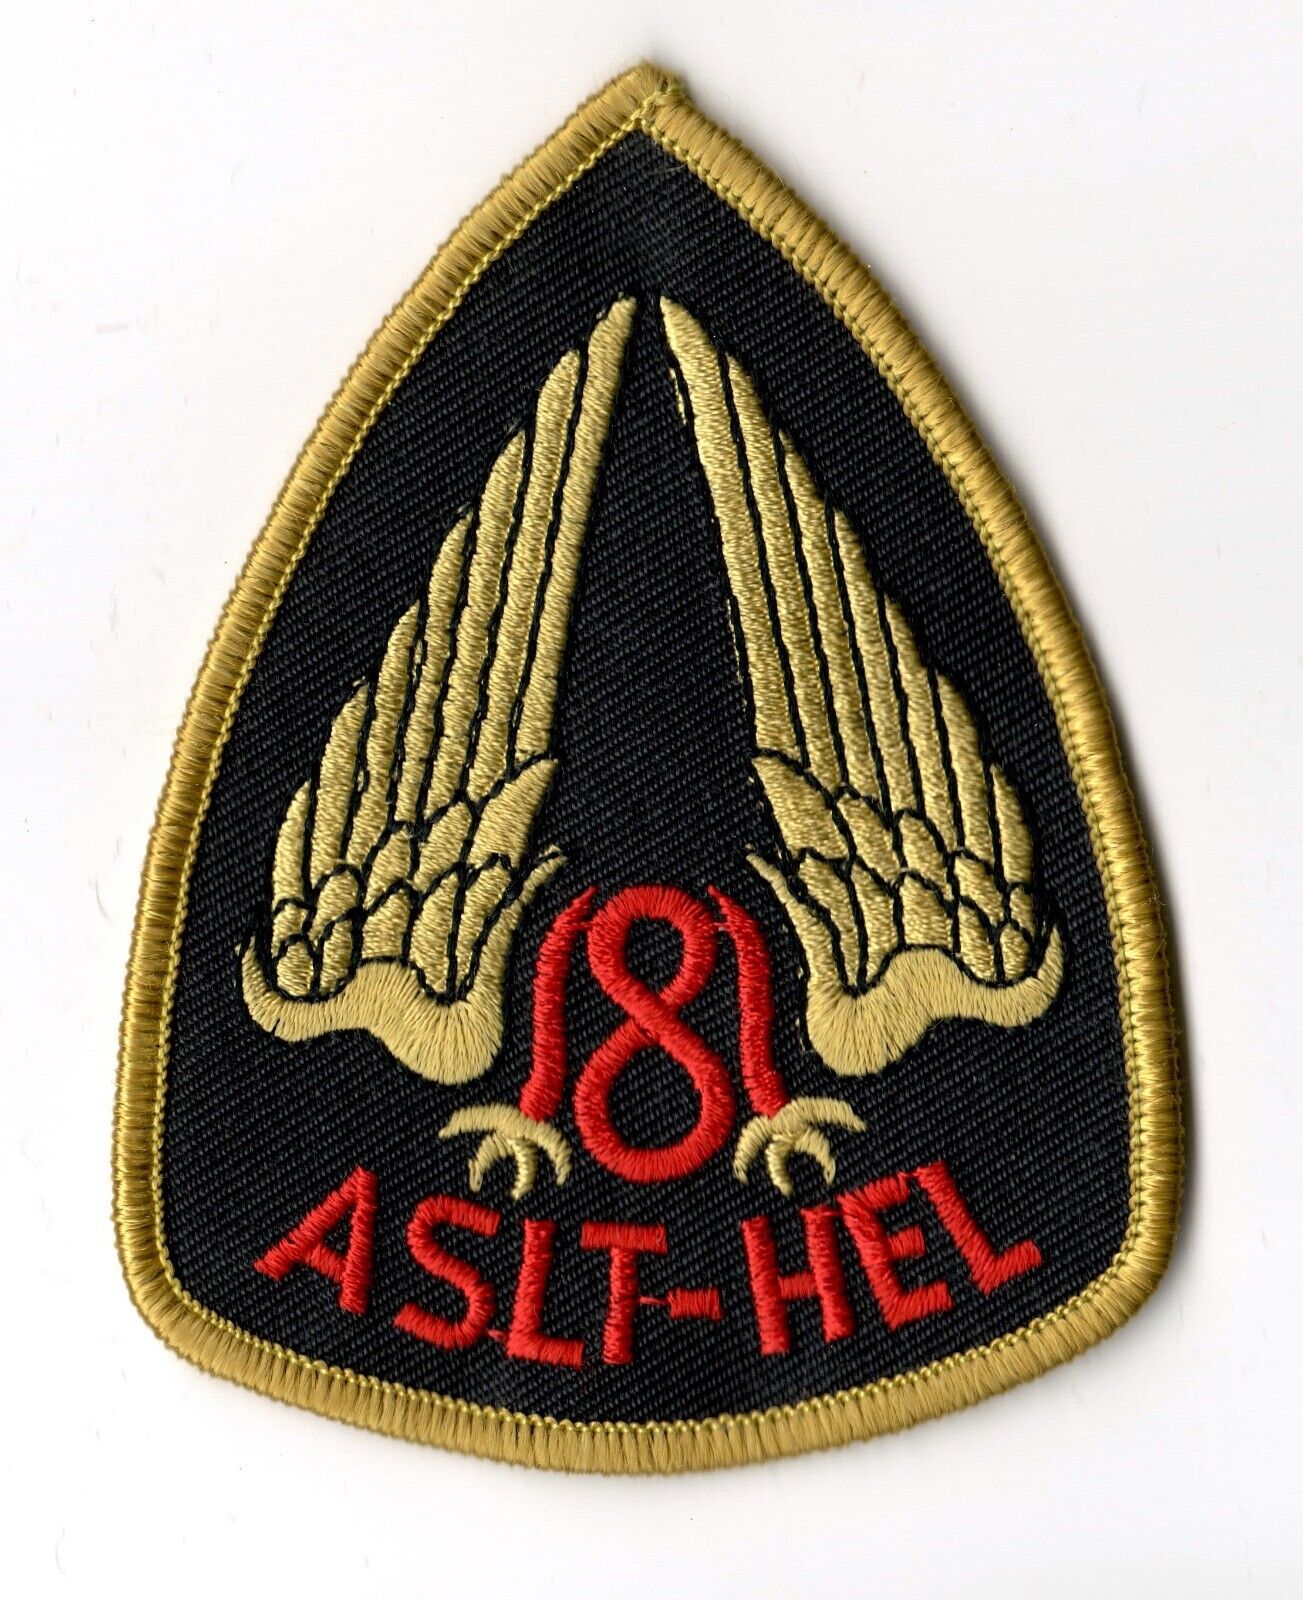 US Army 181st Aviation Company (AHC), Assault Helicopter Company ASLT-HEL Patch